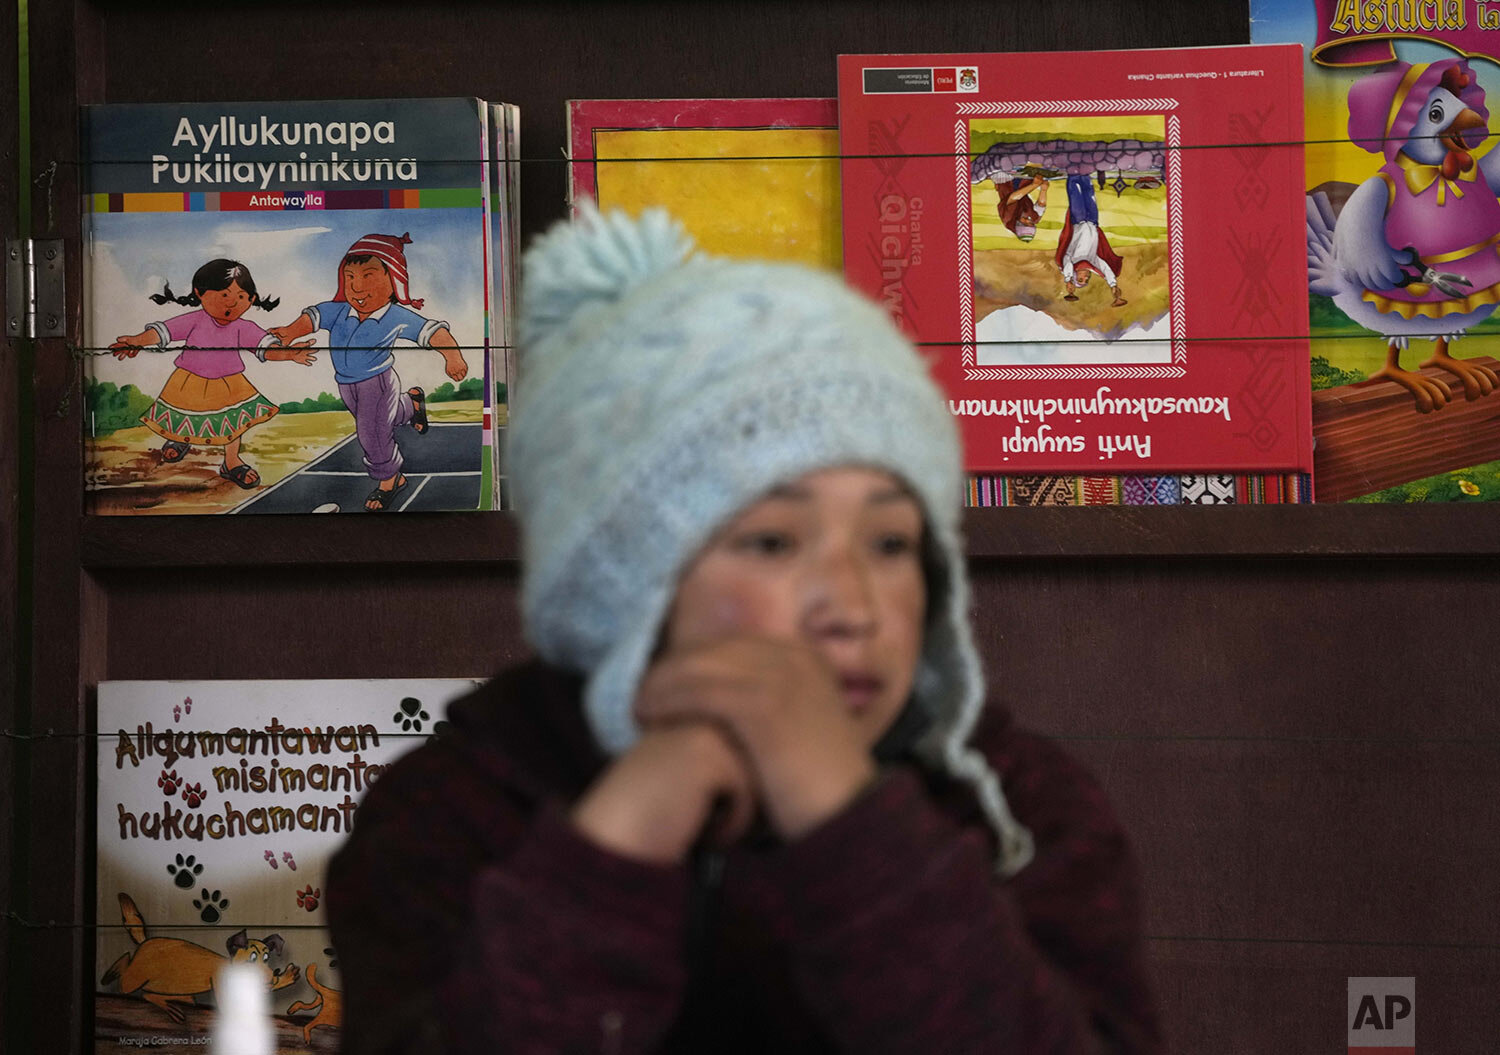  Books written in the Quechua Indigenous language sit behind a student during a class on medicinal plants, at a public primary school in Licapa, Peru, Sept. 1, 2021. Quechua speakers are expecting that Peru’s new government, led by a rural schoolteac